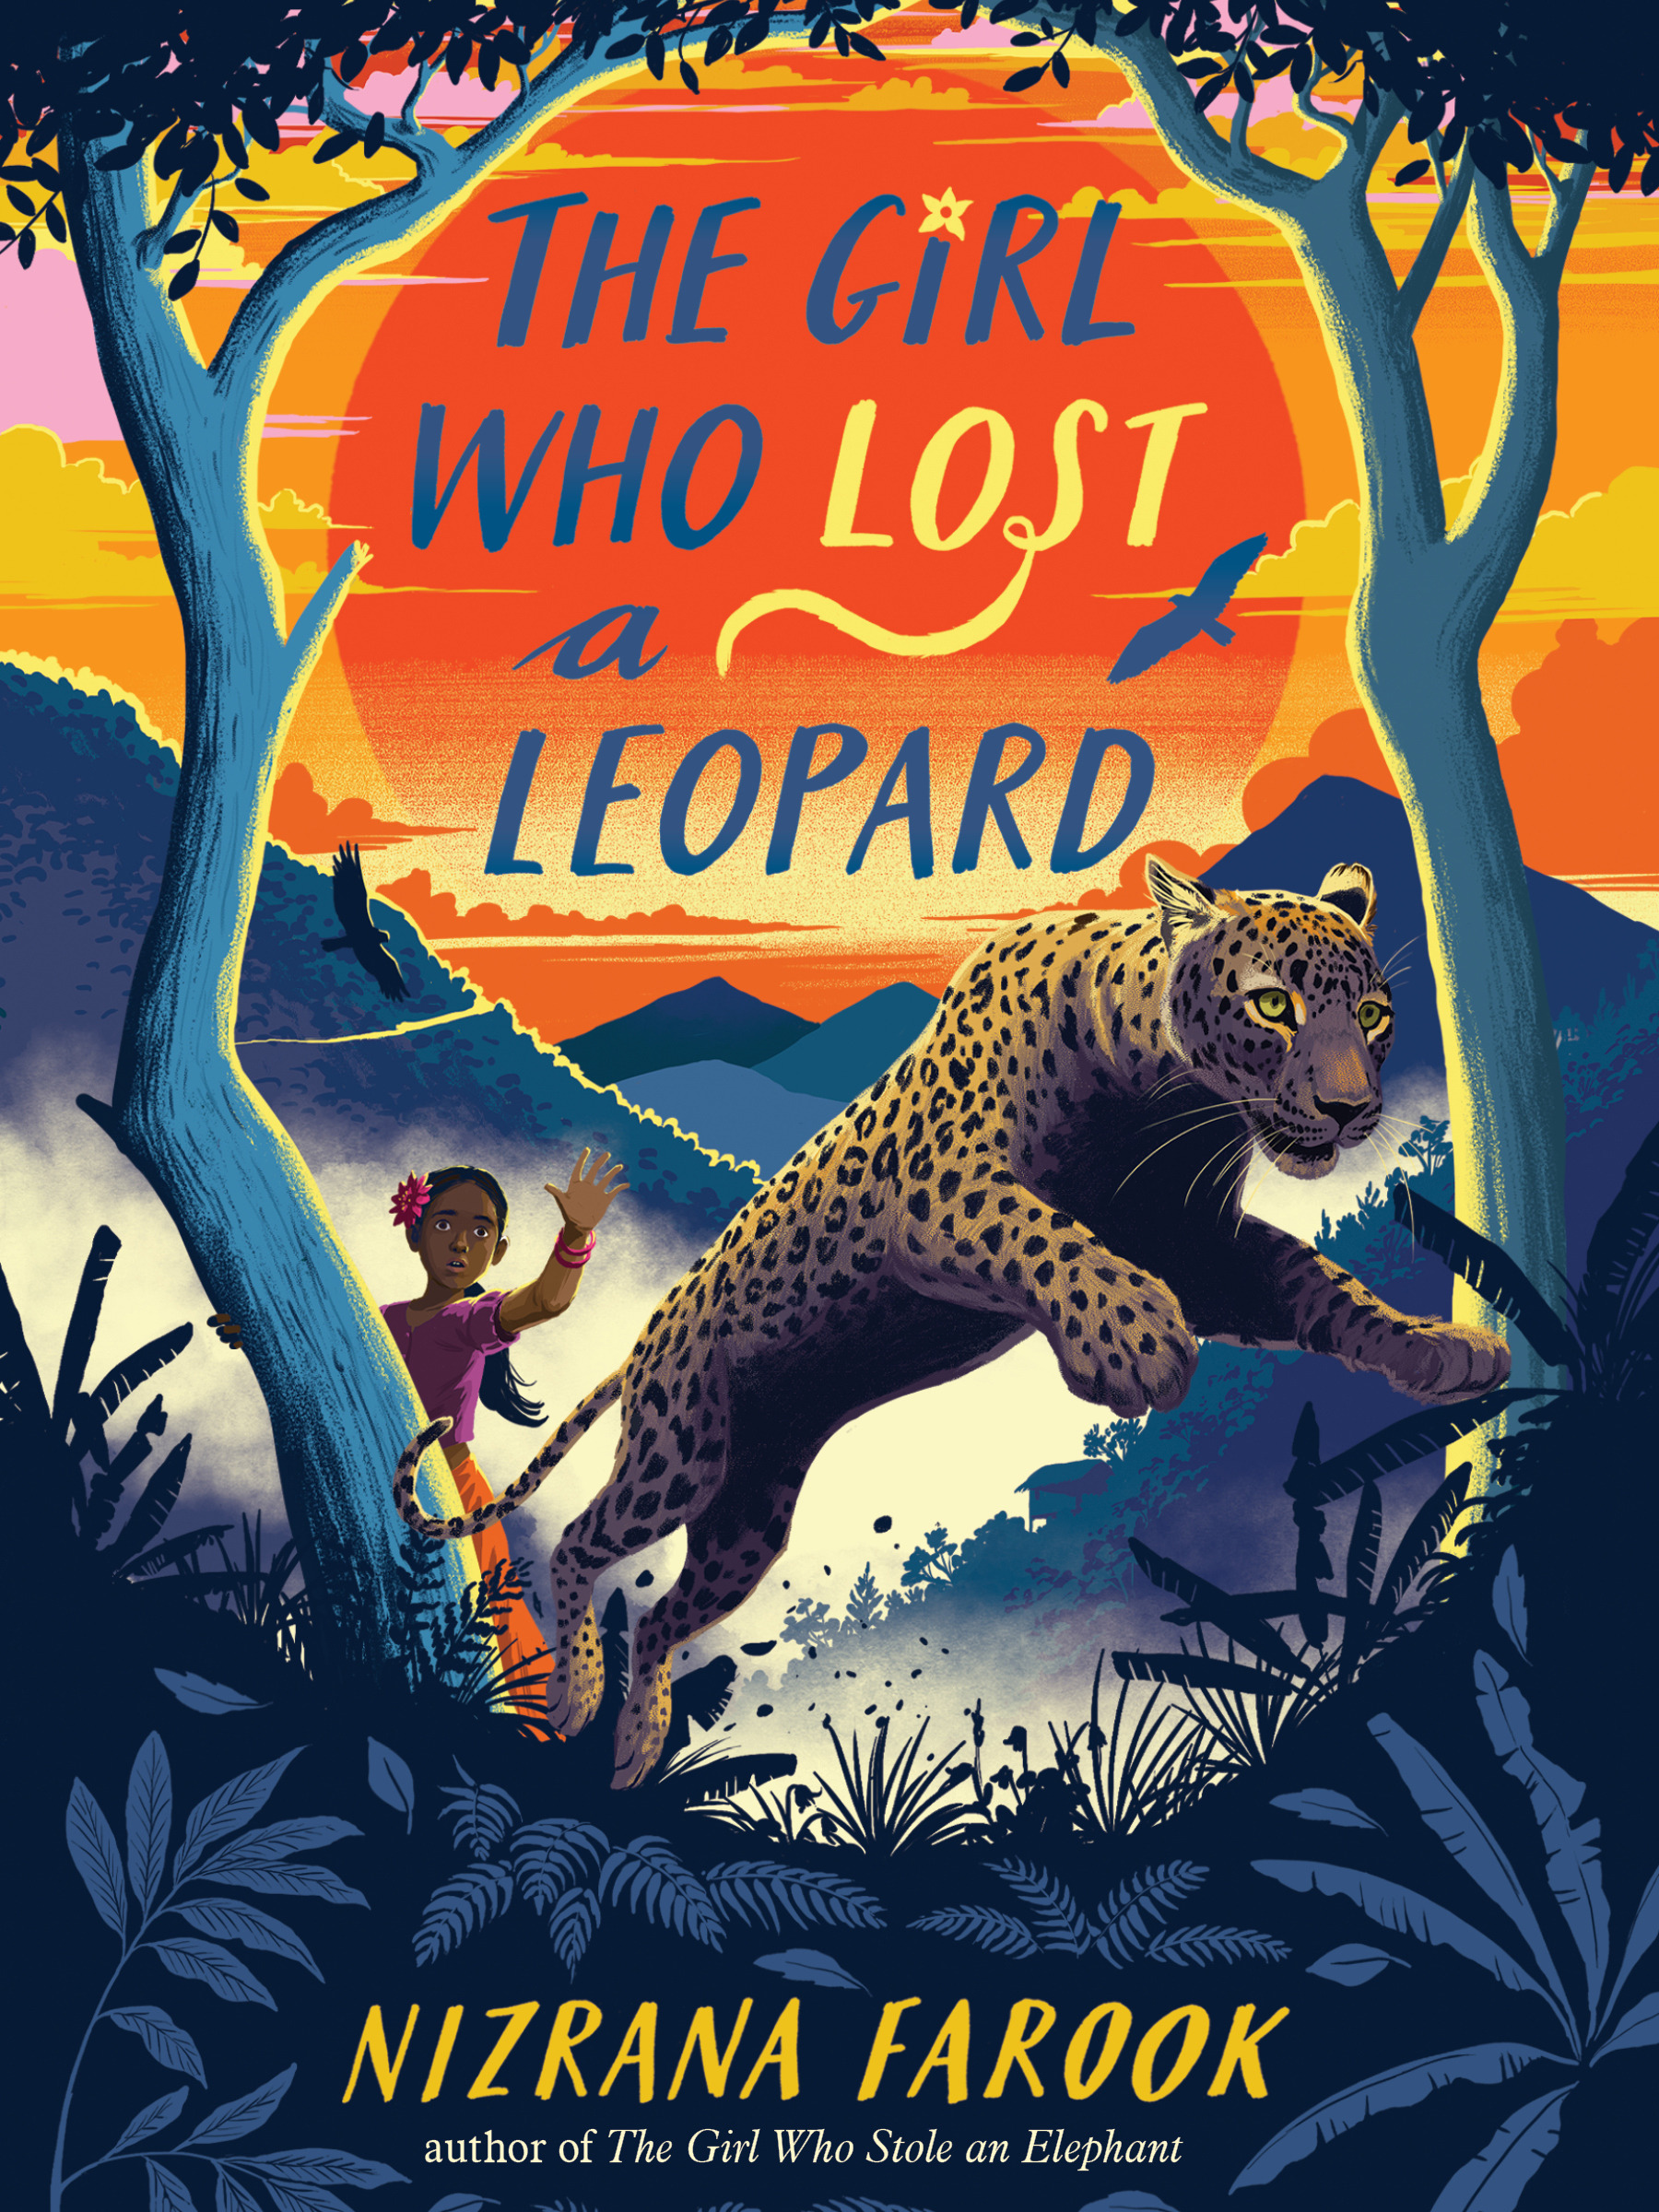 The Leopard in the Mirror, a guest post by Nizrana Farook